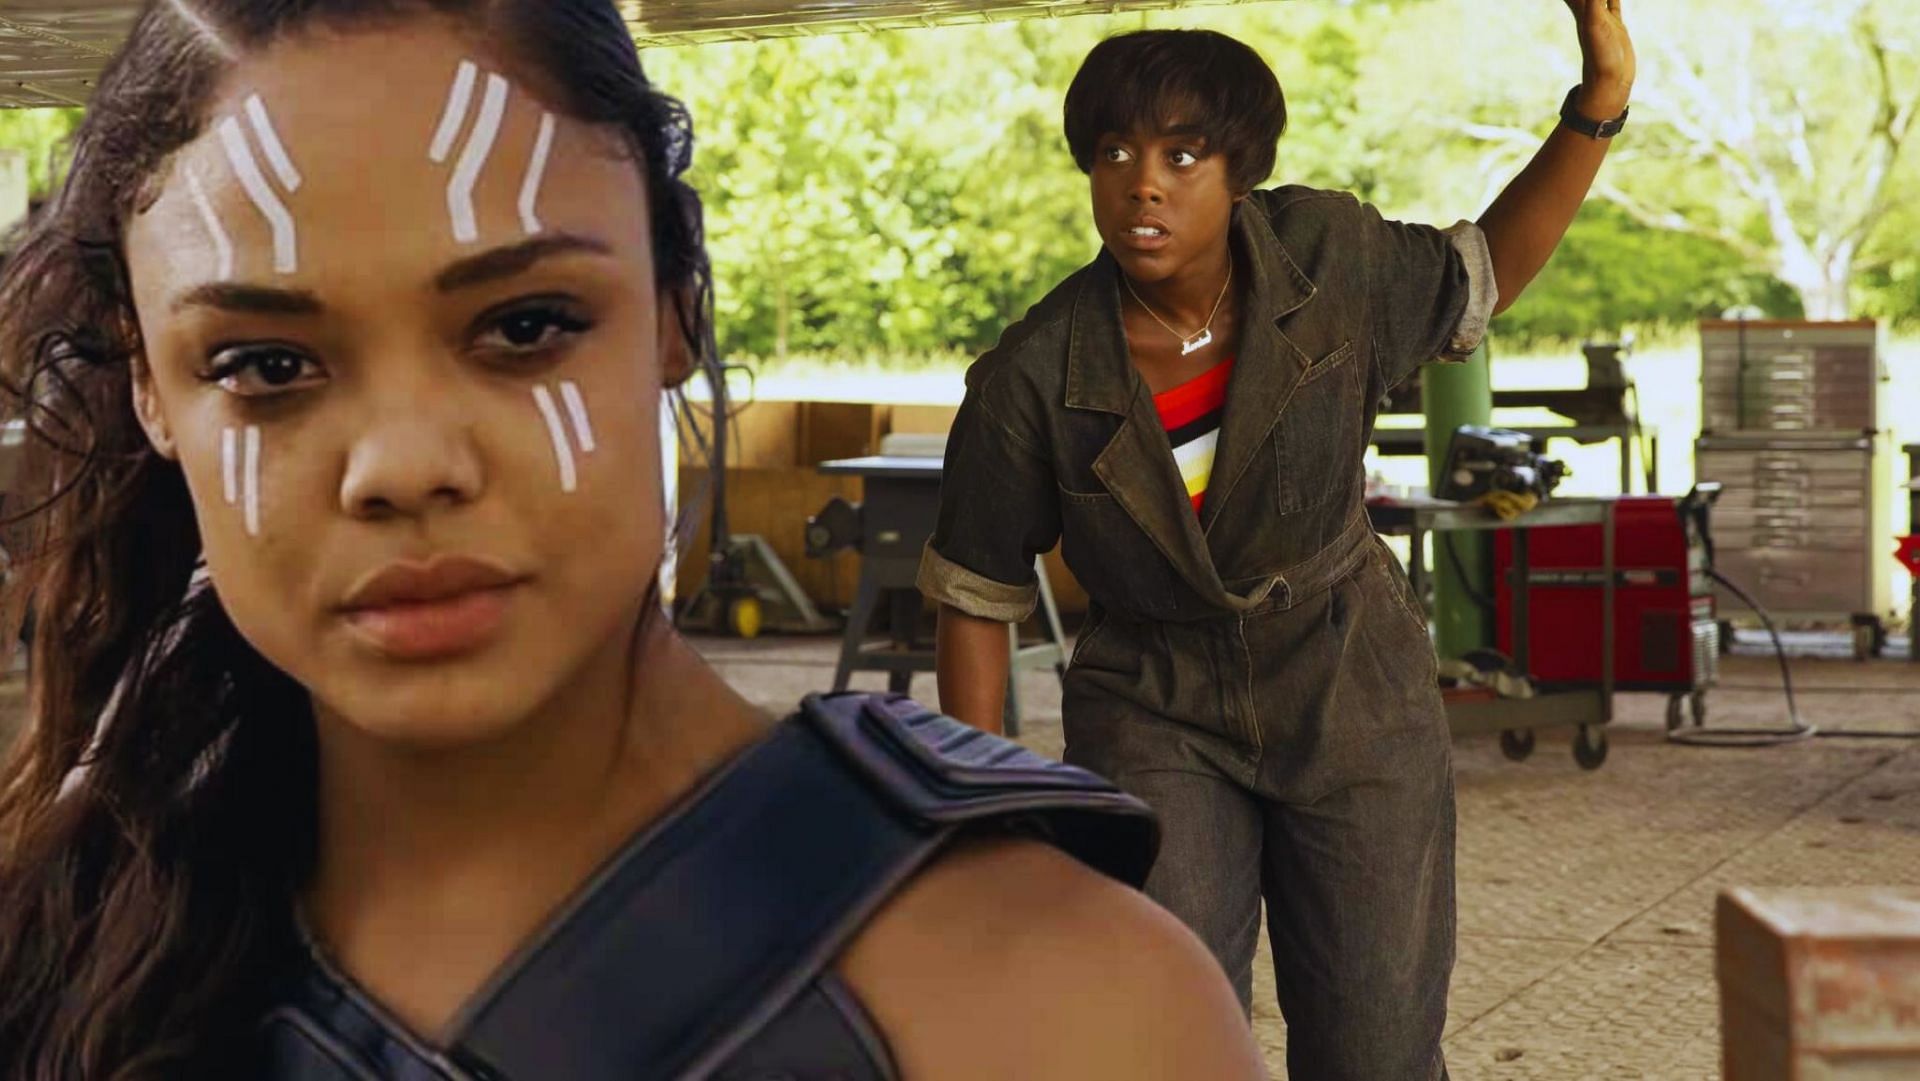 Rumored characters in Captain Marvel 2: Could Valkyrie or Maria Rambeau make a return? (Image via Sportskeeda)